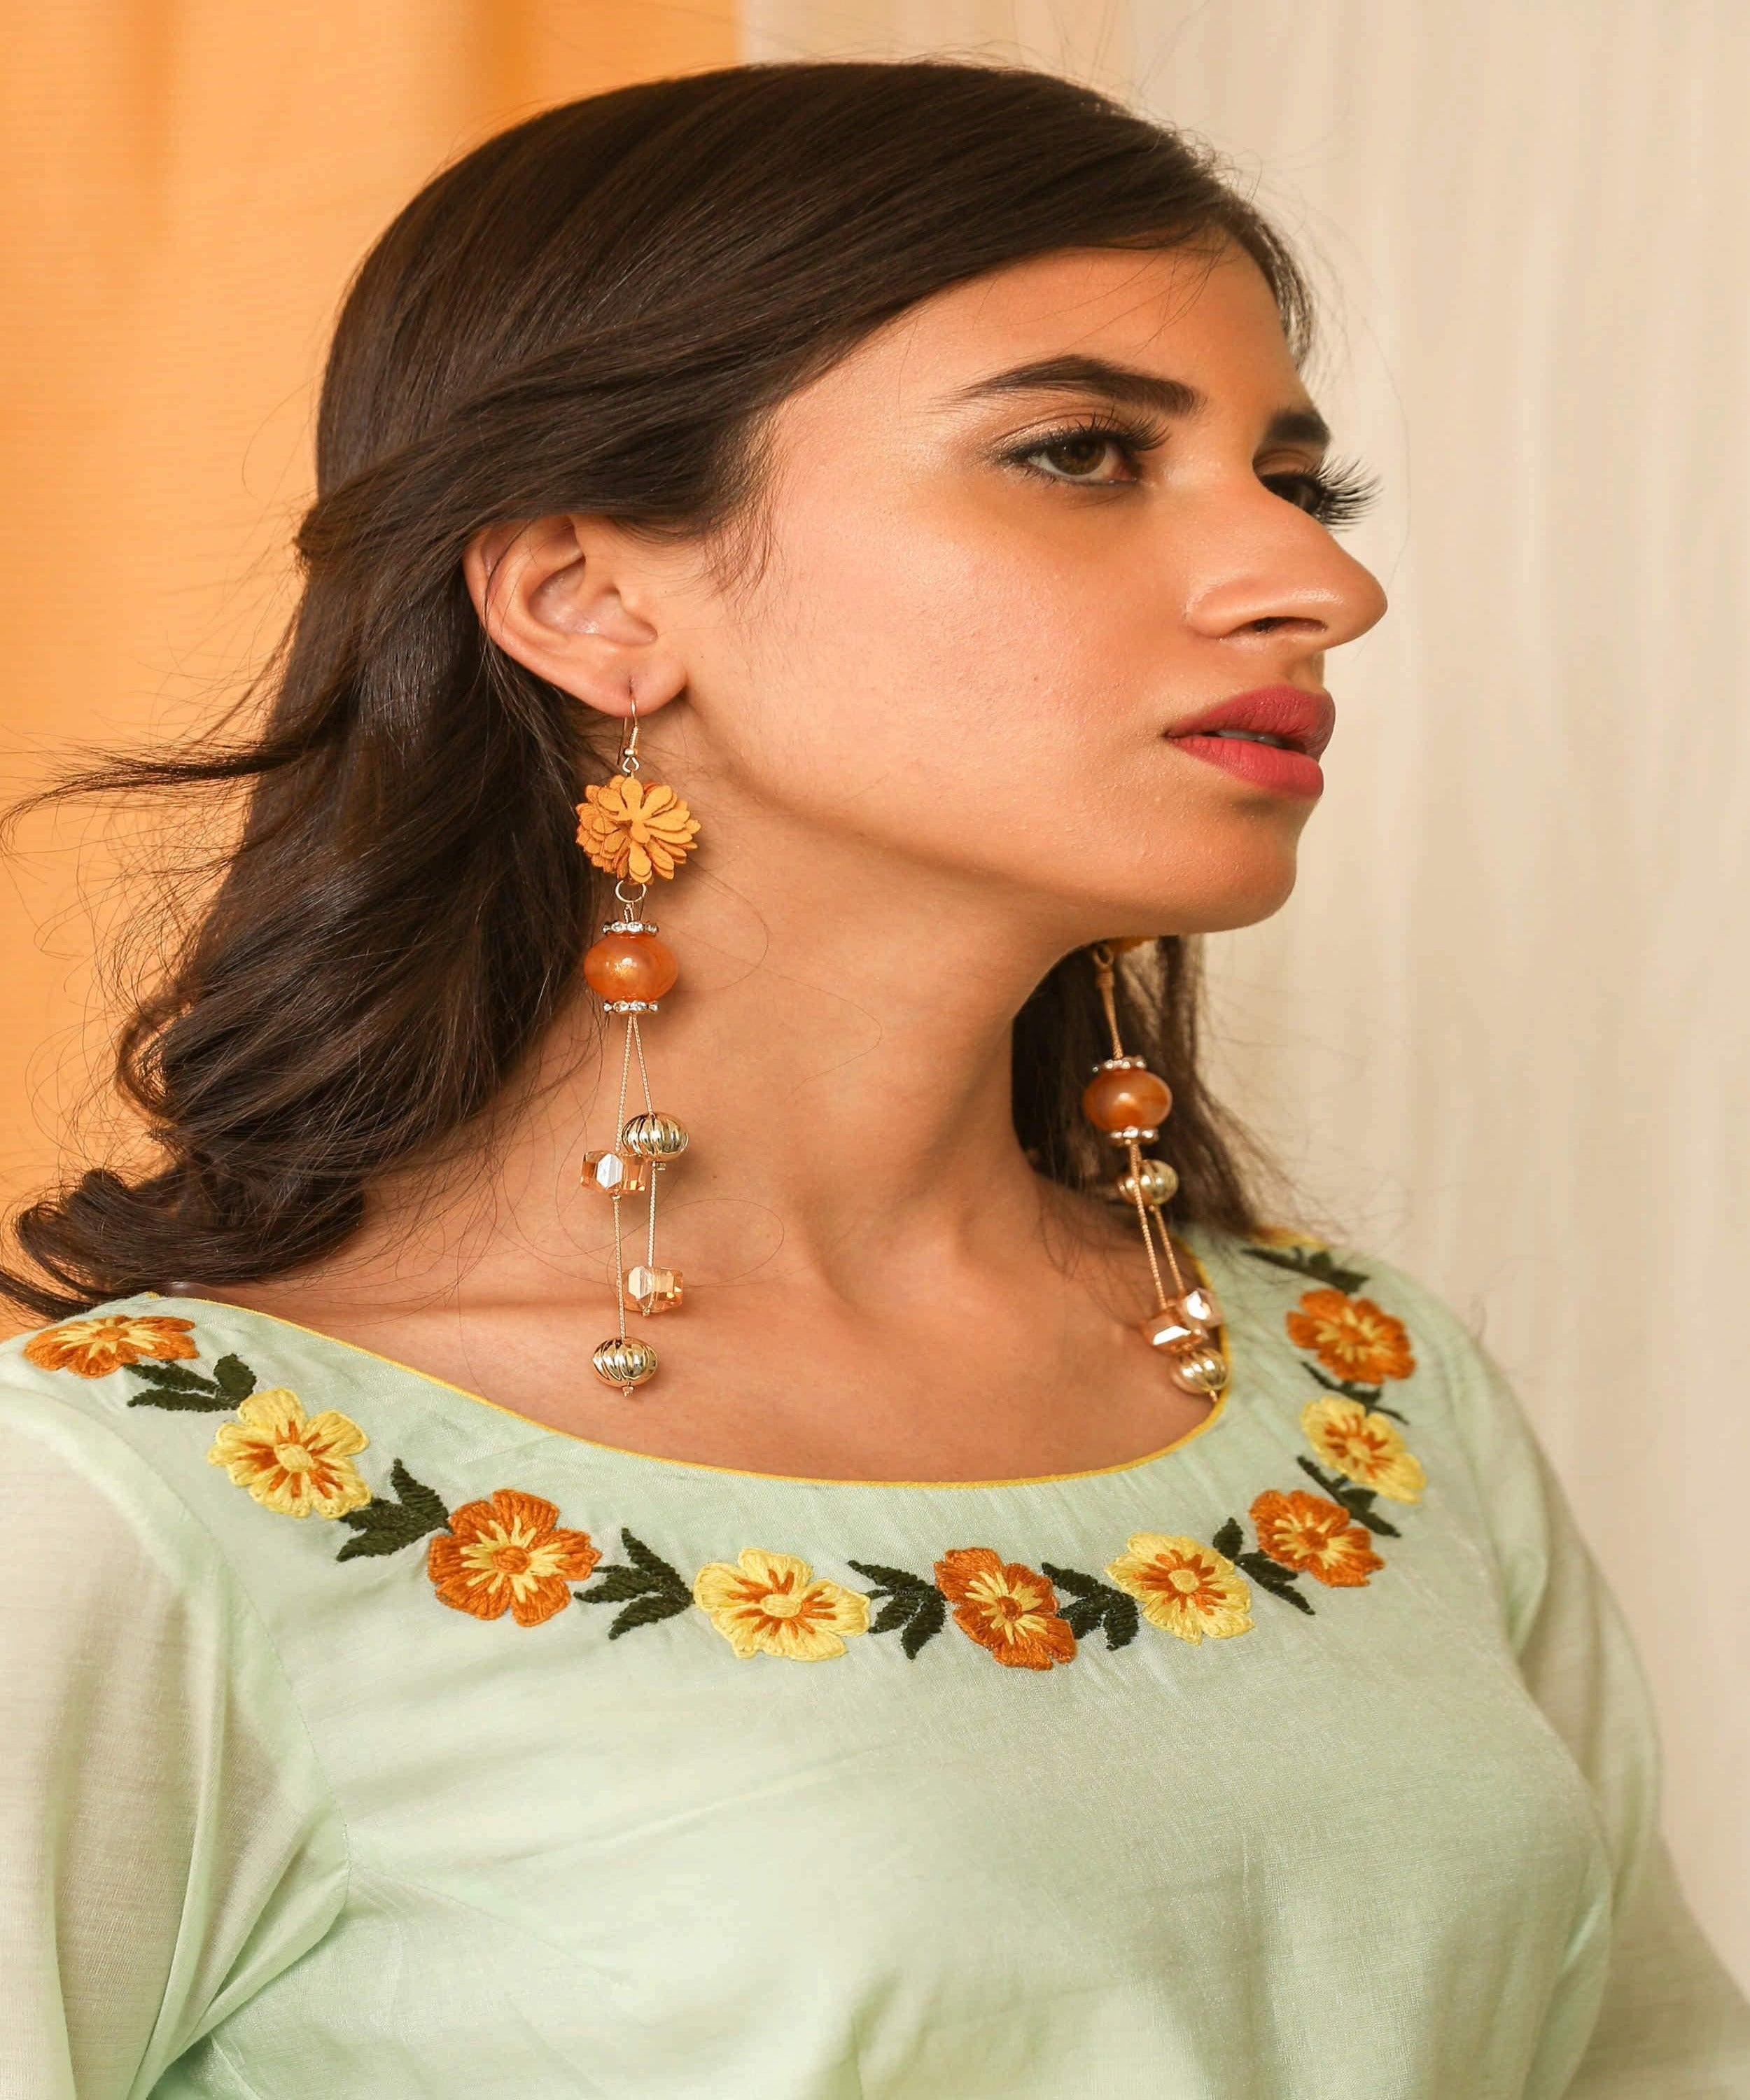 Indian Girl Poses Kurti Earrings Jhumka Designs Collection for Wedding  Guest Outfits | Statement earrings, Pearl earrings, Silver earrings